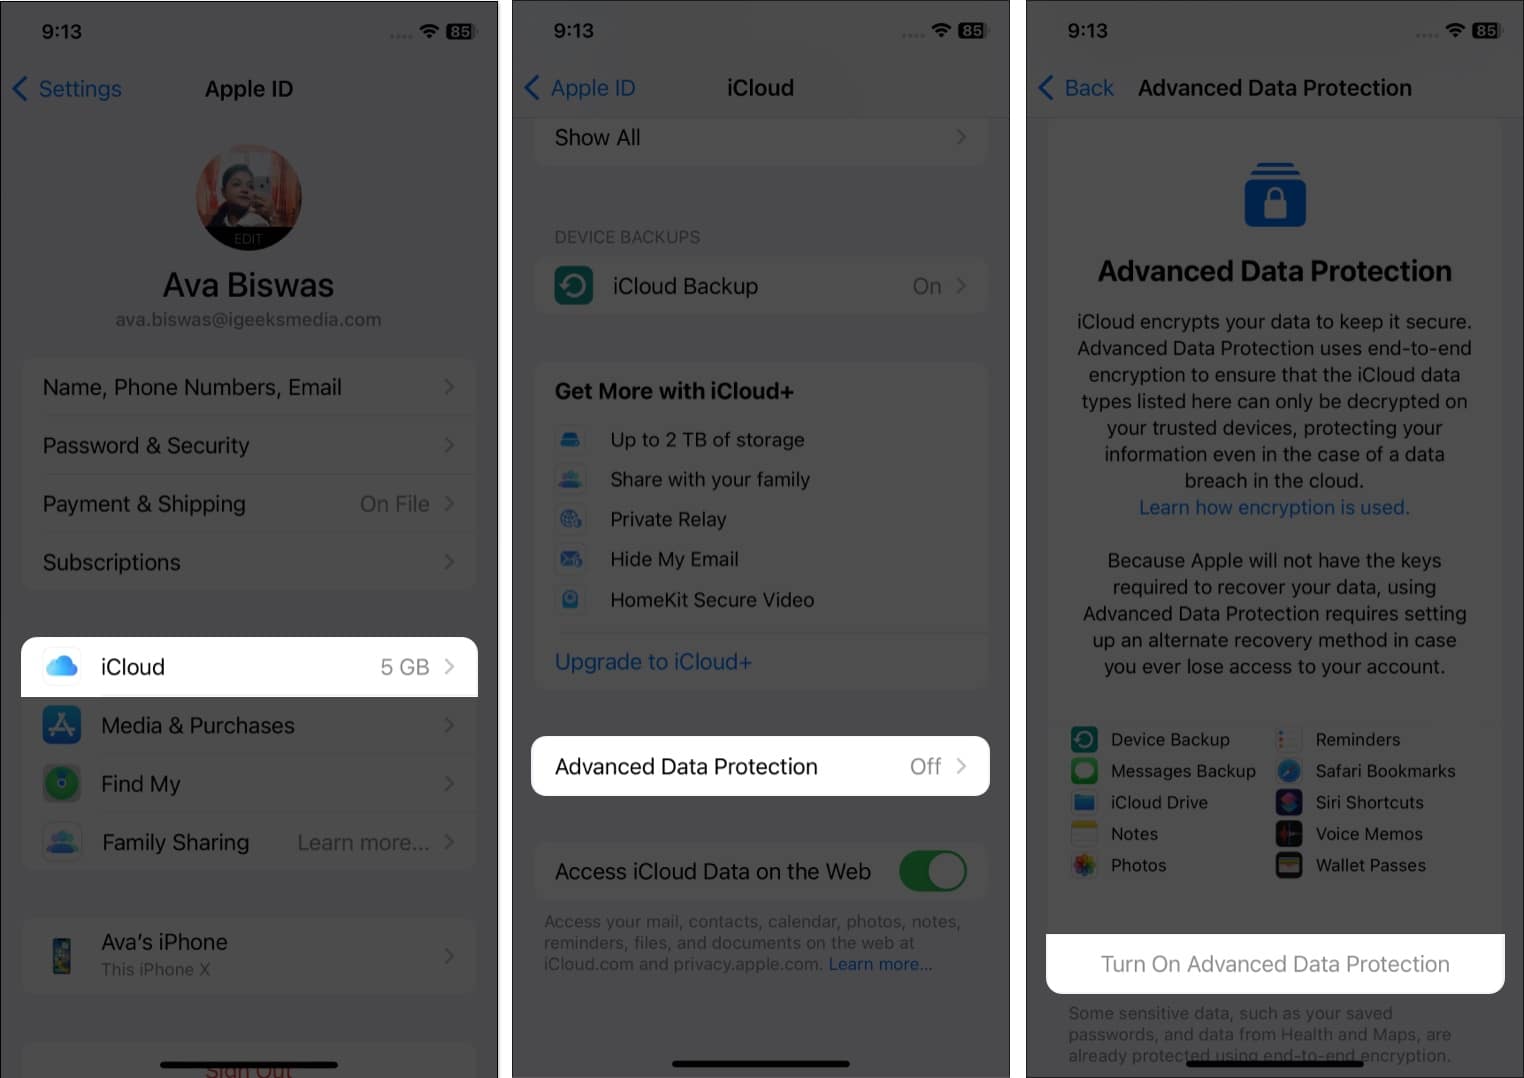 Tap Advanced Data Protection in Settings on iPhone